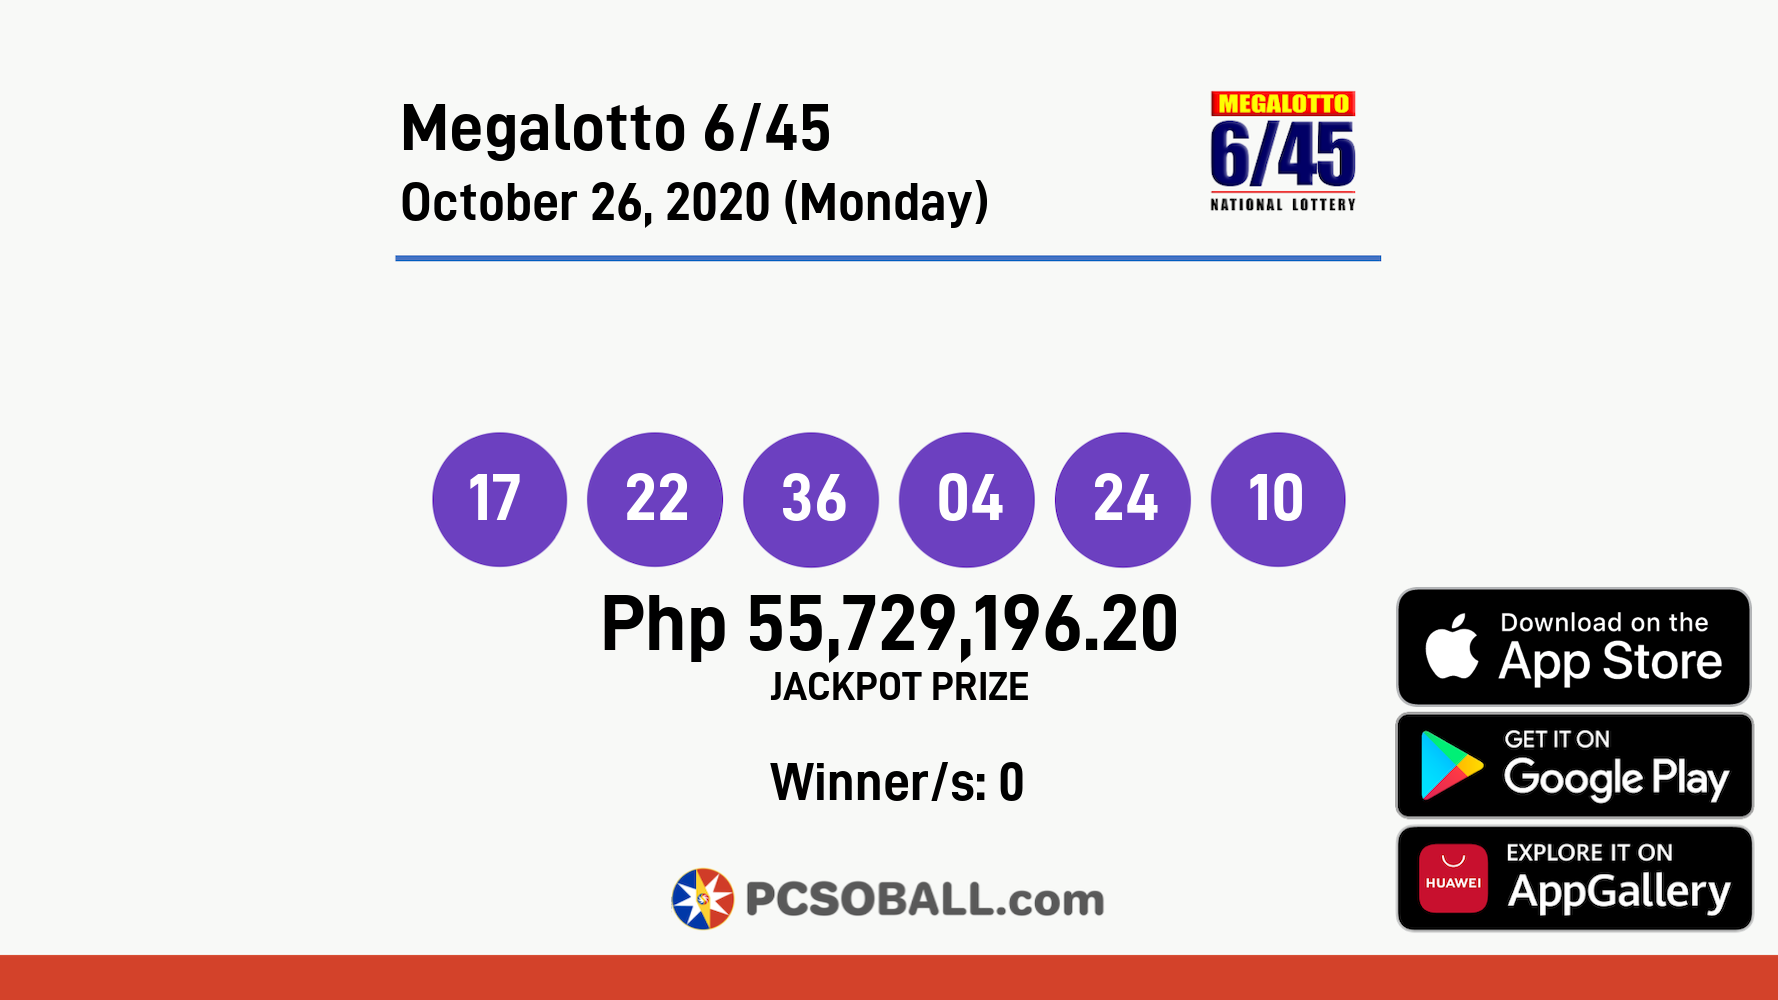 Megalotto 6/45 October 26, 2020 (Monday) Result